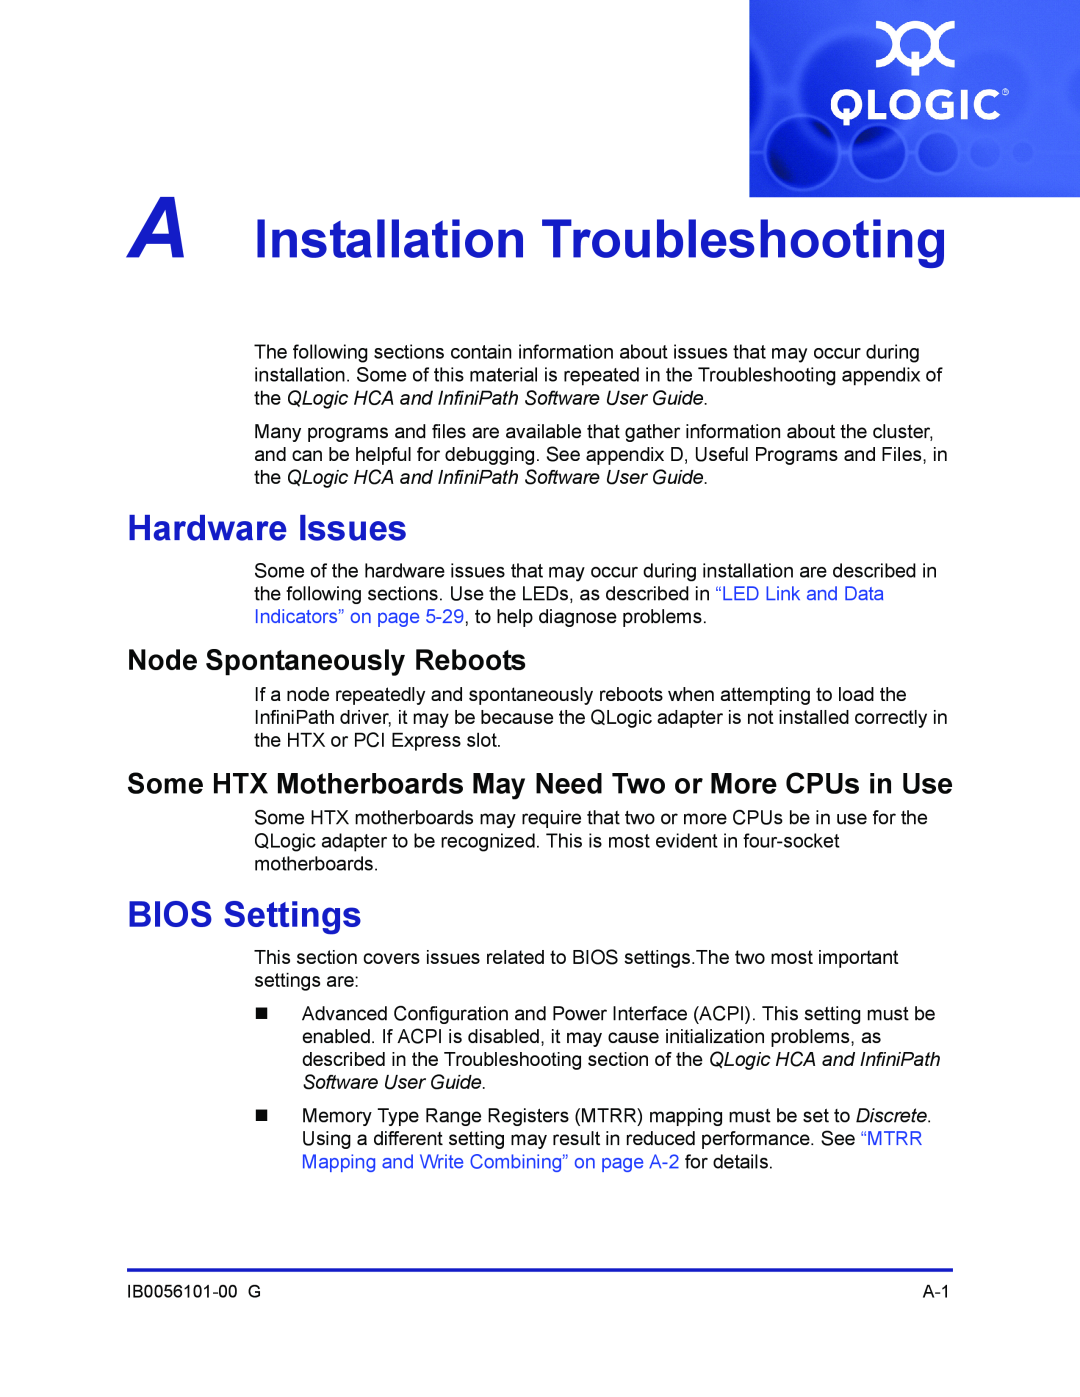 Q-Logic IB0056101-00 G manual A Installation Troubleshooting, Hardware Issues, BIOS Settings, Node Spontaneously Reboots 